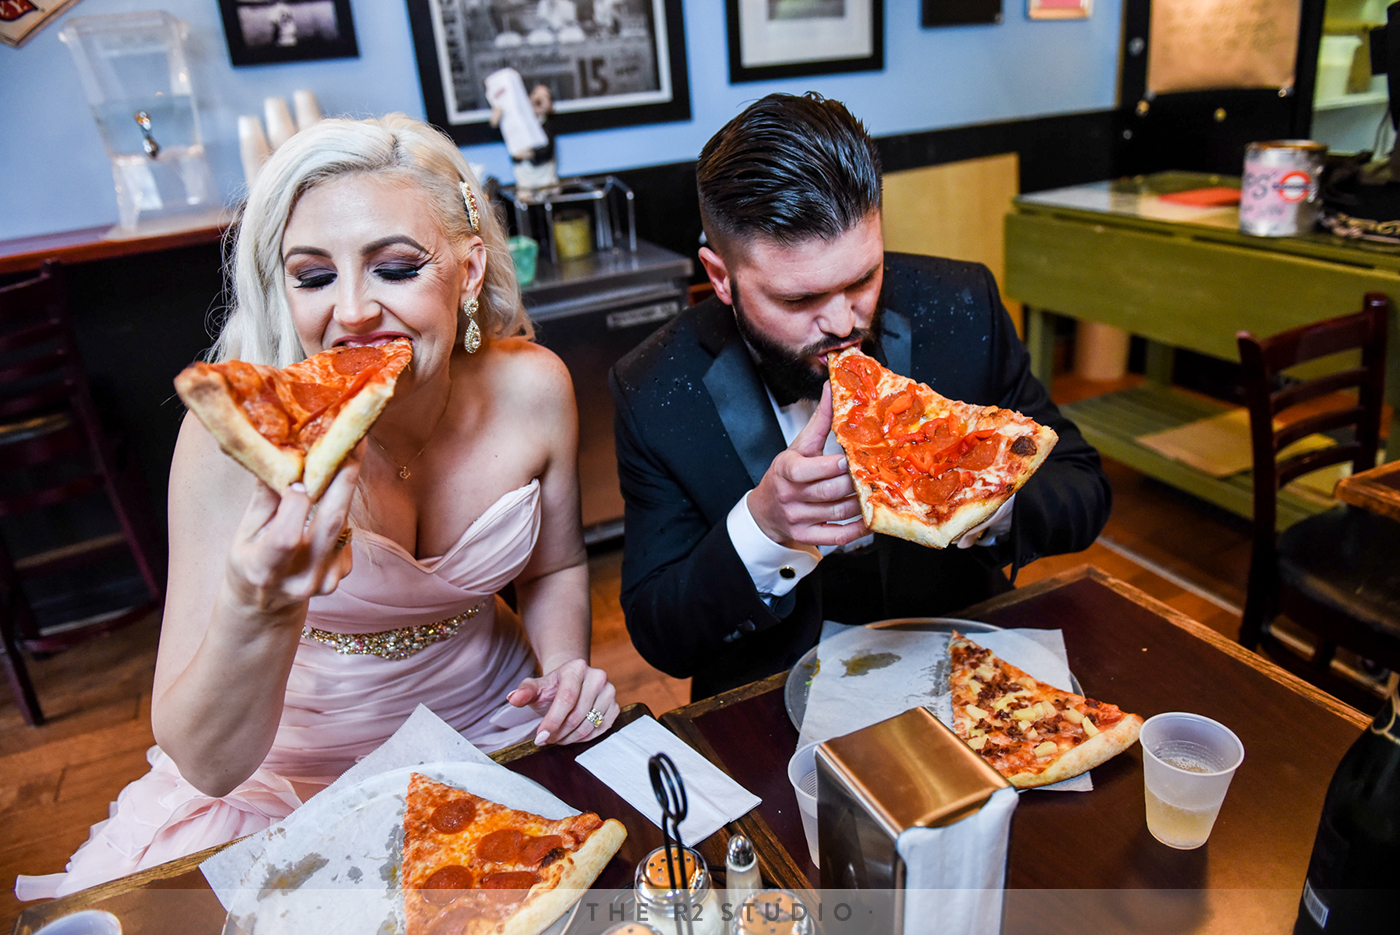 Sommer and Brody spared no expense during this spur of the moment pit stop at a local San Francisco pizza joint, which included a quick toast of champagne in plastic dixie cups.